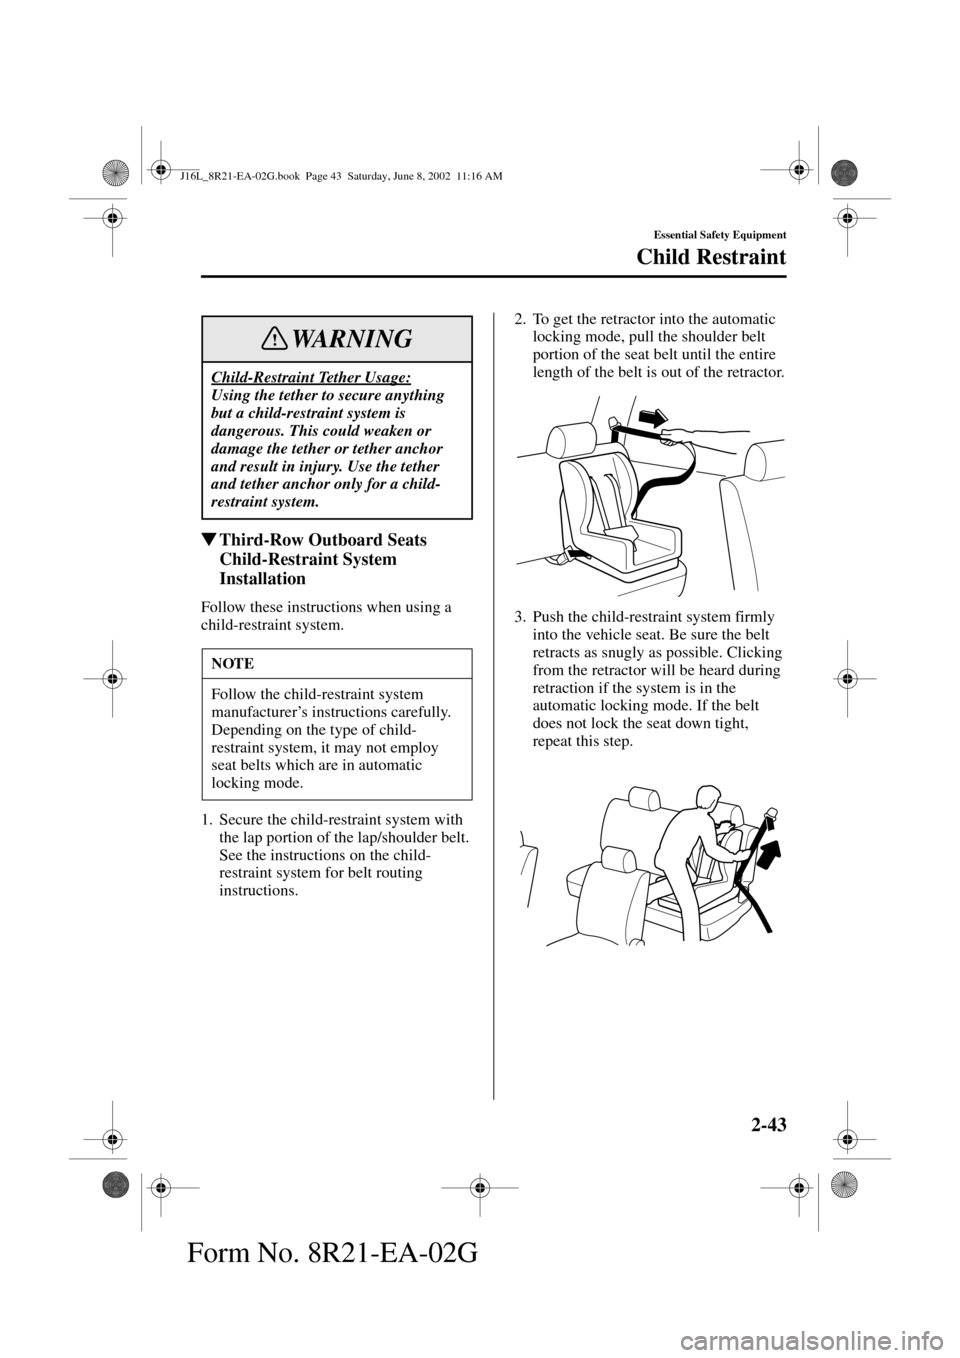 MAZDA MODEL MPV 2003  Owners Manual (in English) 2-43
Essential Safety Equipment
Child Restraint
Form No. 8R21-EA-02G
Third-Row Outboard Seats 
Child-Restraint System 
Installation
Follow these instructions when using a 
child-restraint system.
1. 